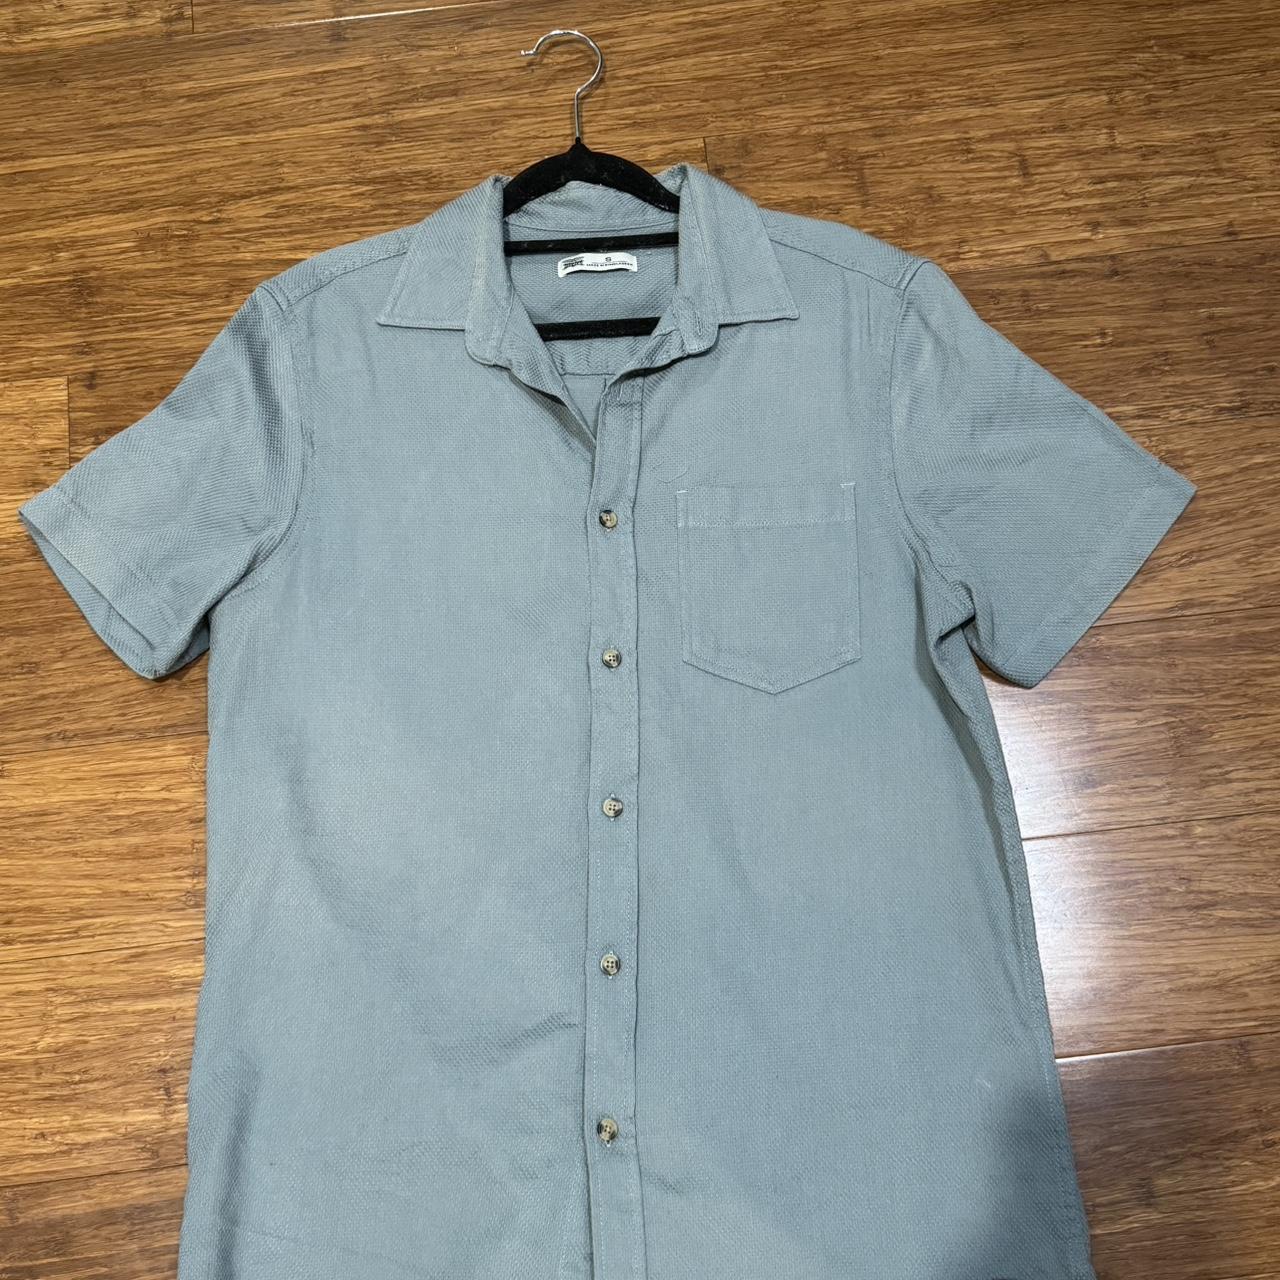 Vintage rivers button up shirt Sized small - Depop